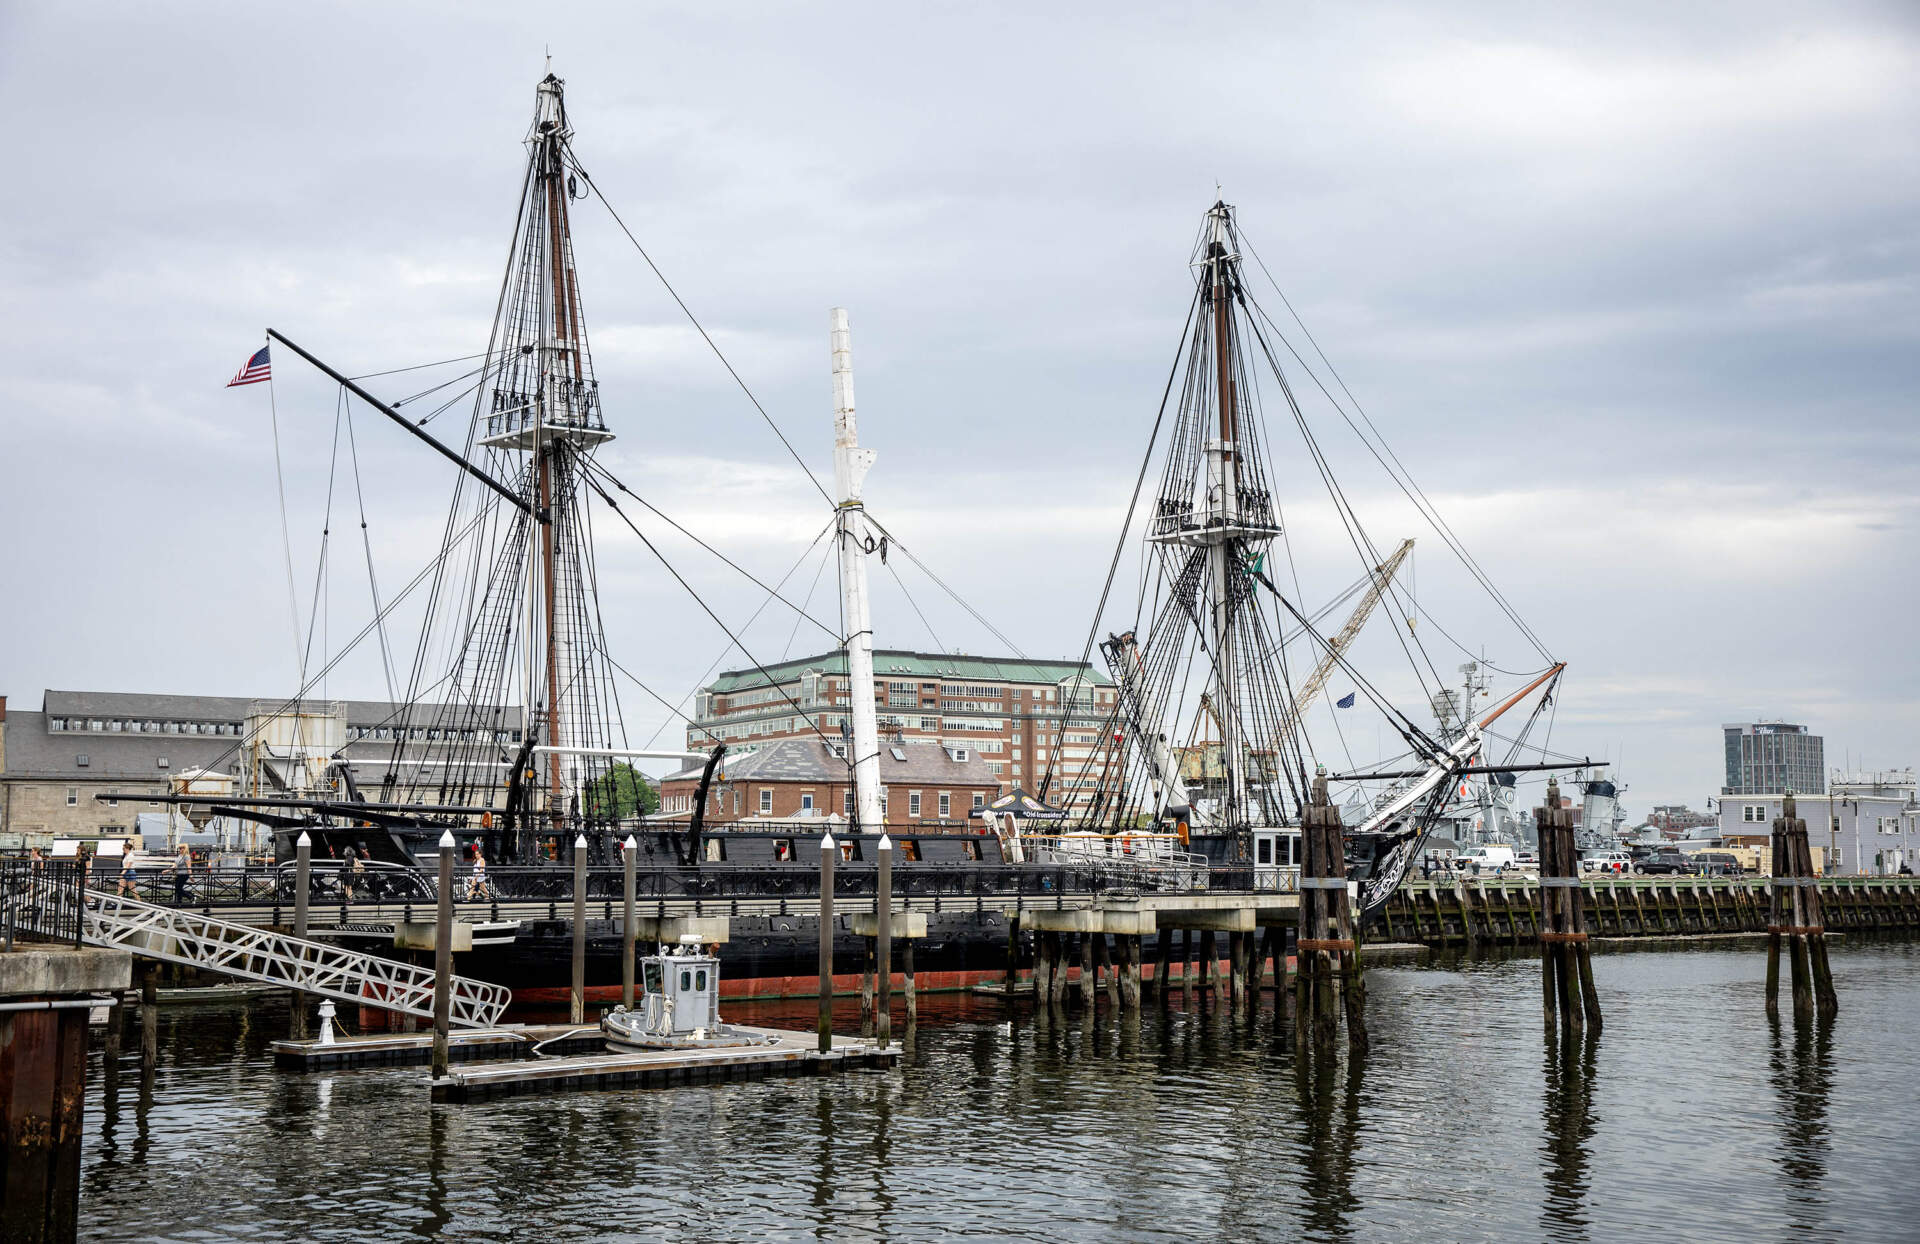 The USS Constitution is being restored at the Charlestown Navy Yard. (Robin Lubbock/WBUR)